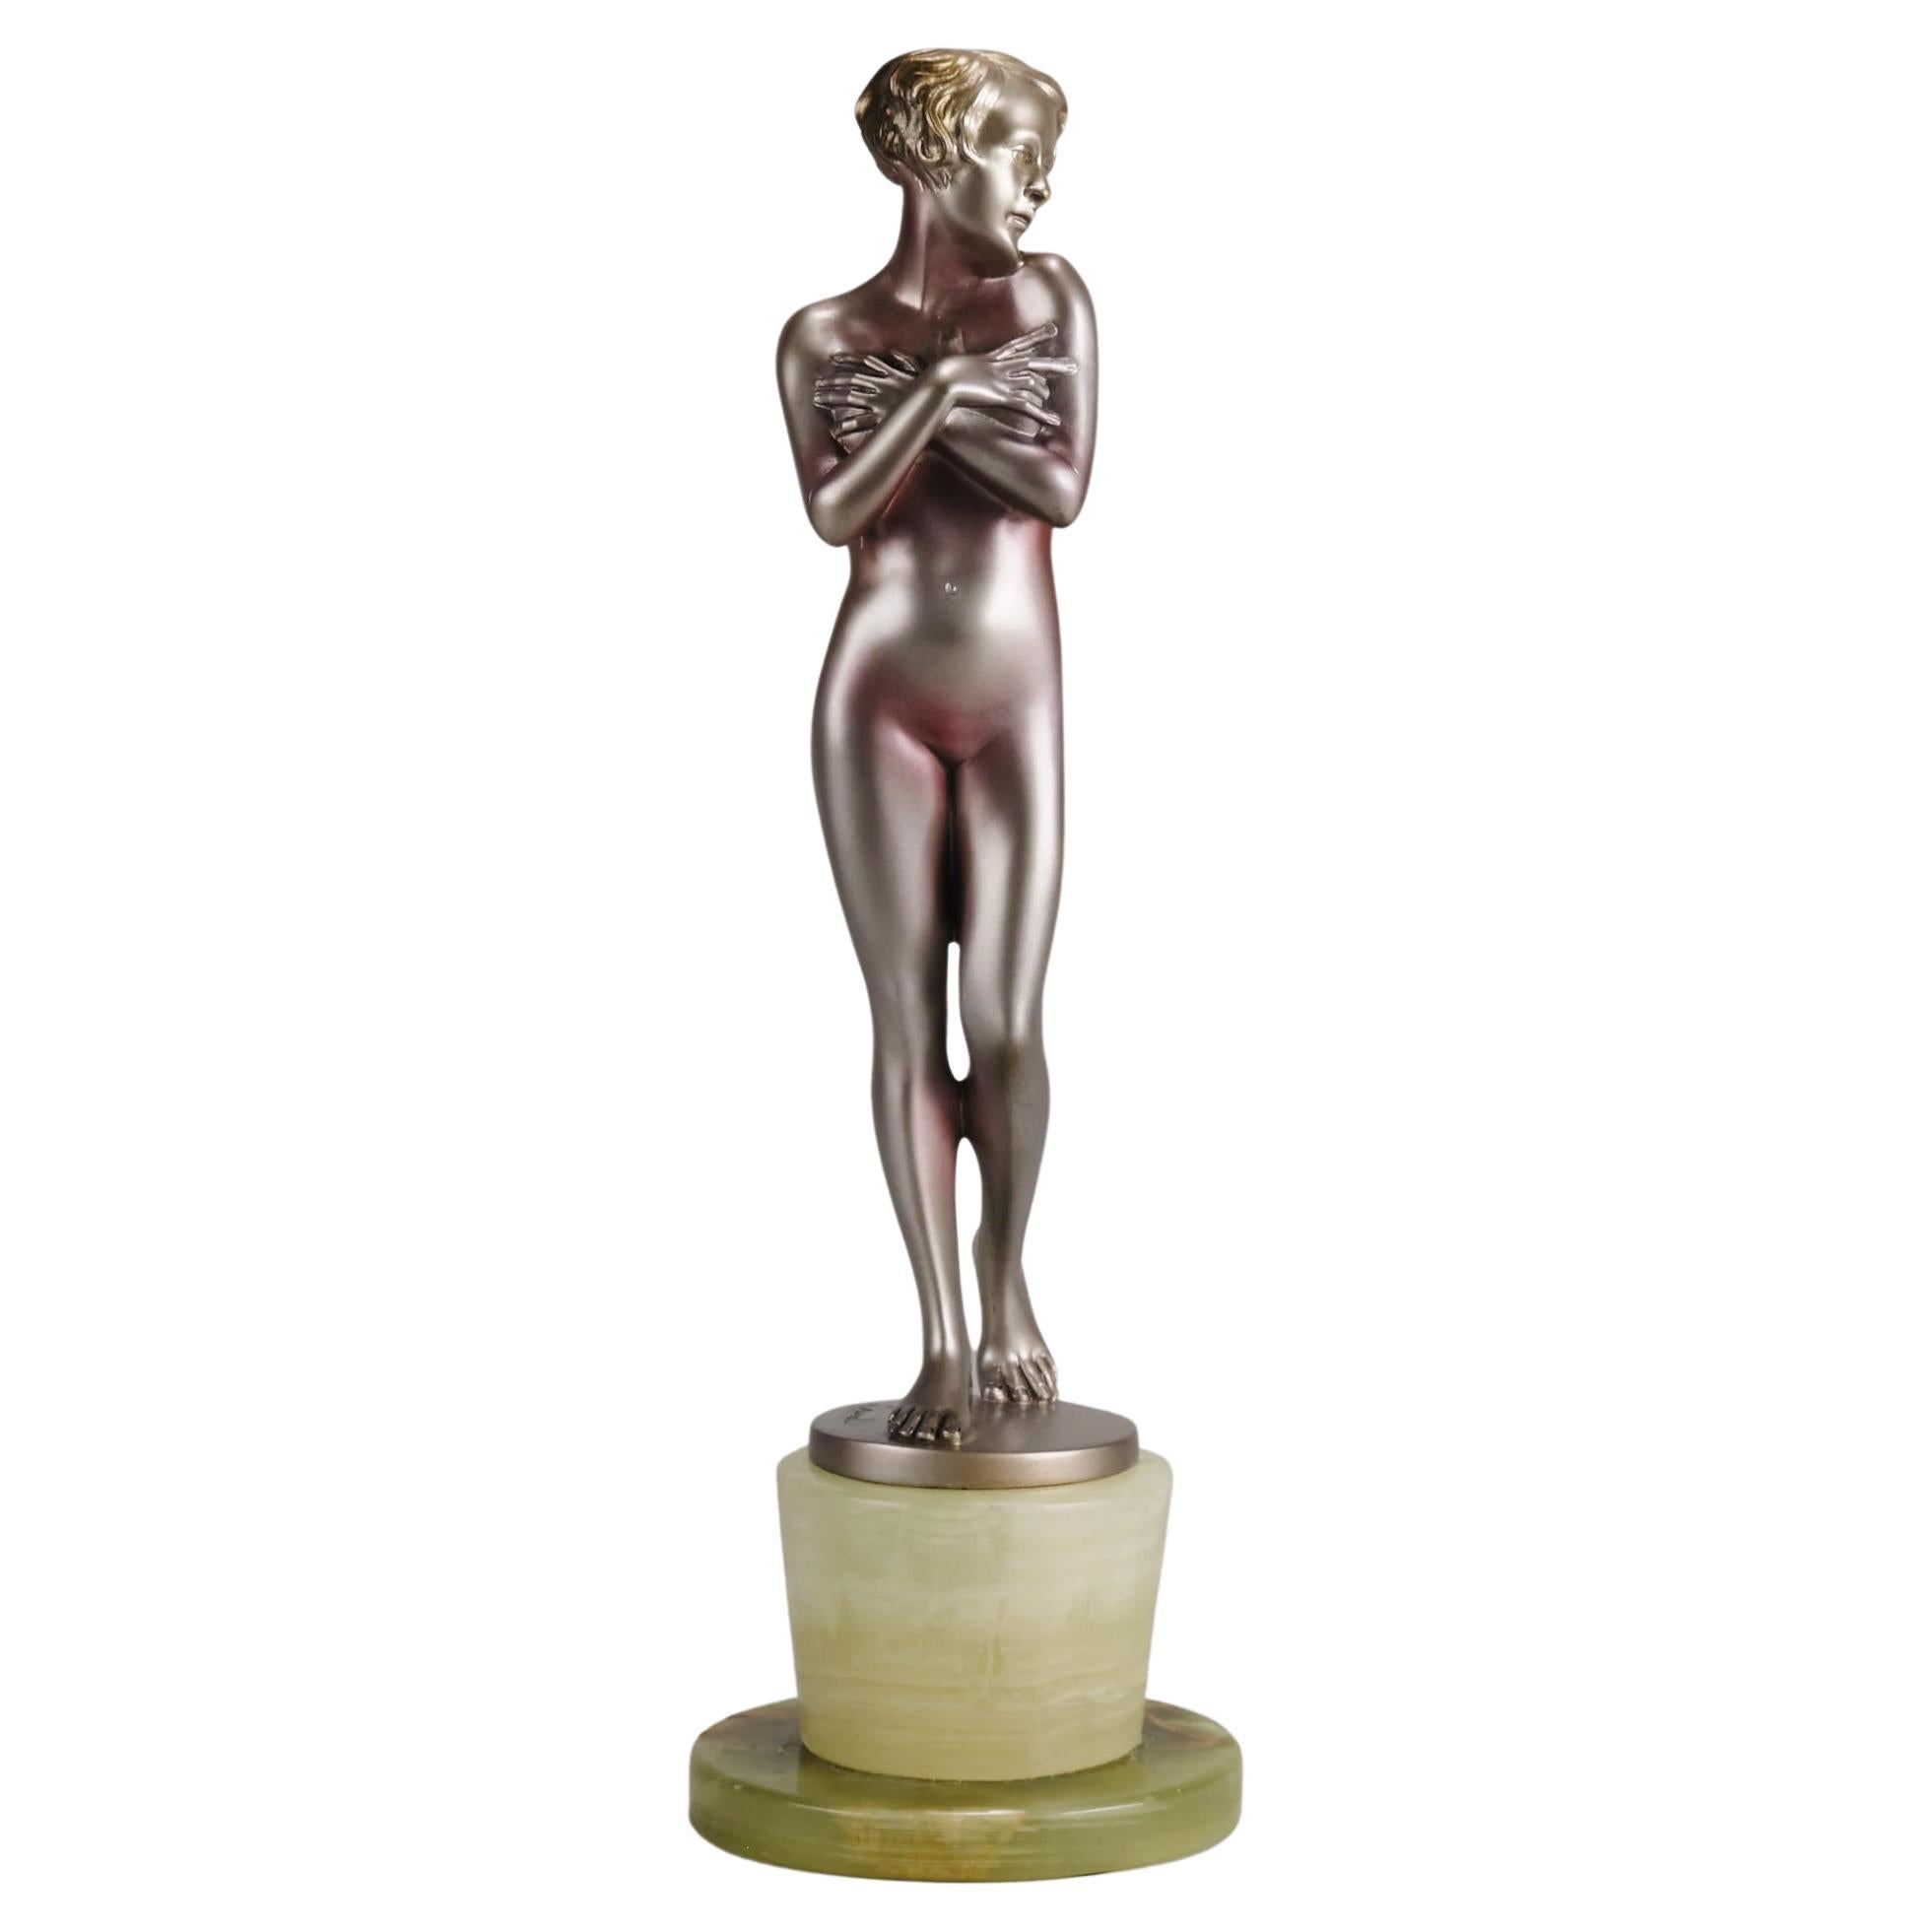 Early 20th Century Bronze Sculpture Entitled "Coy Girl" by Josef Lorenzl For Sale